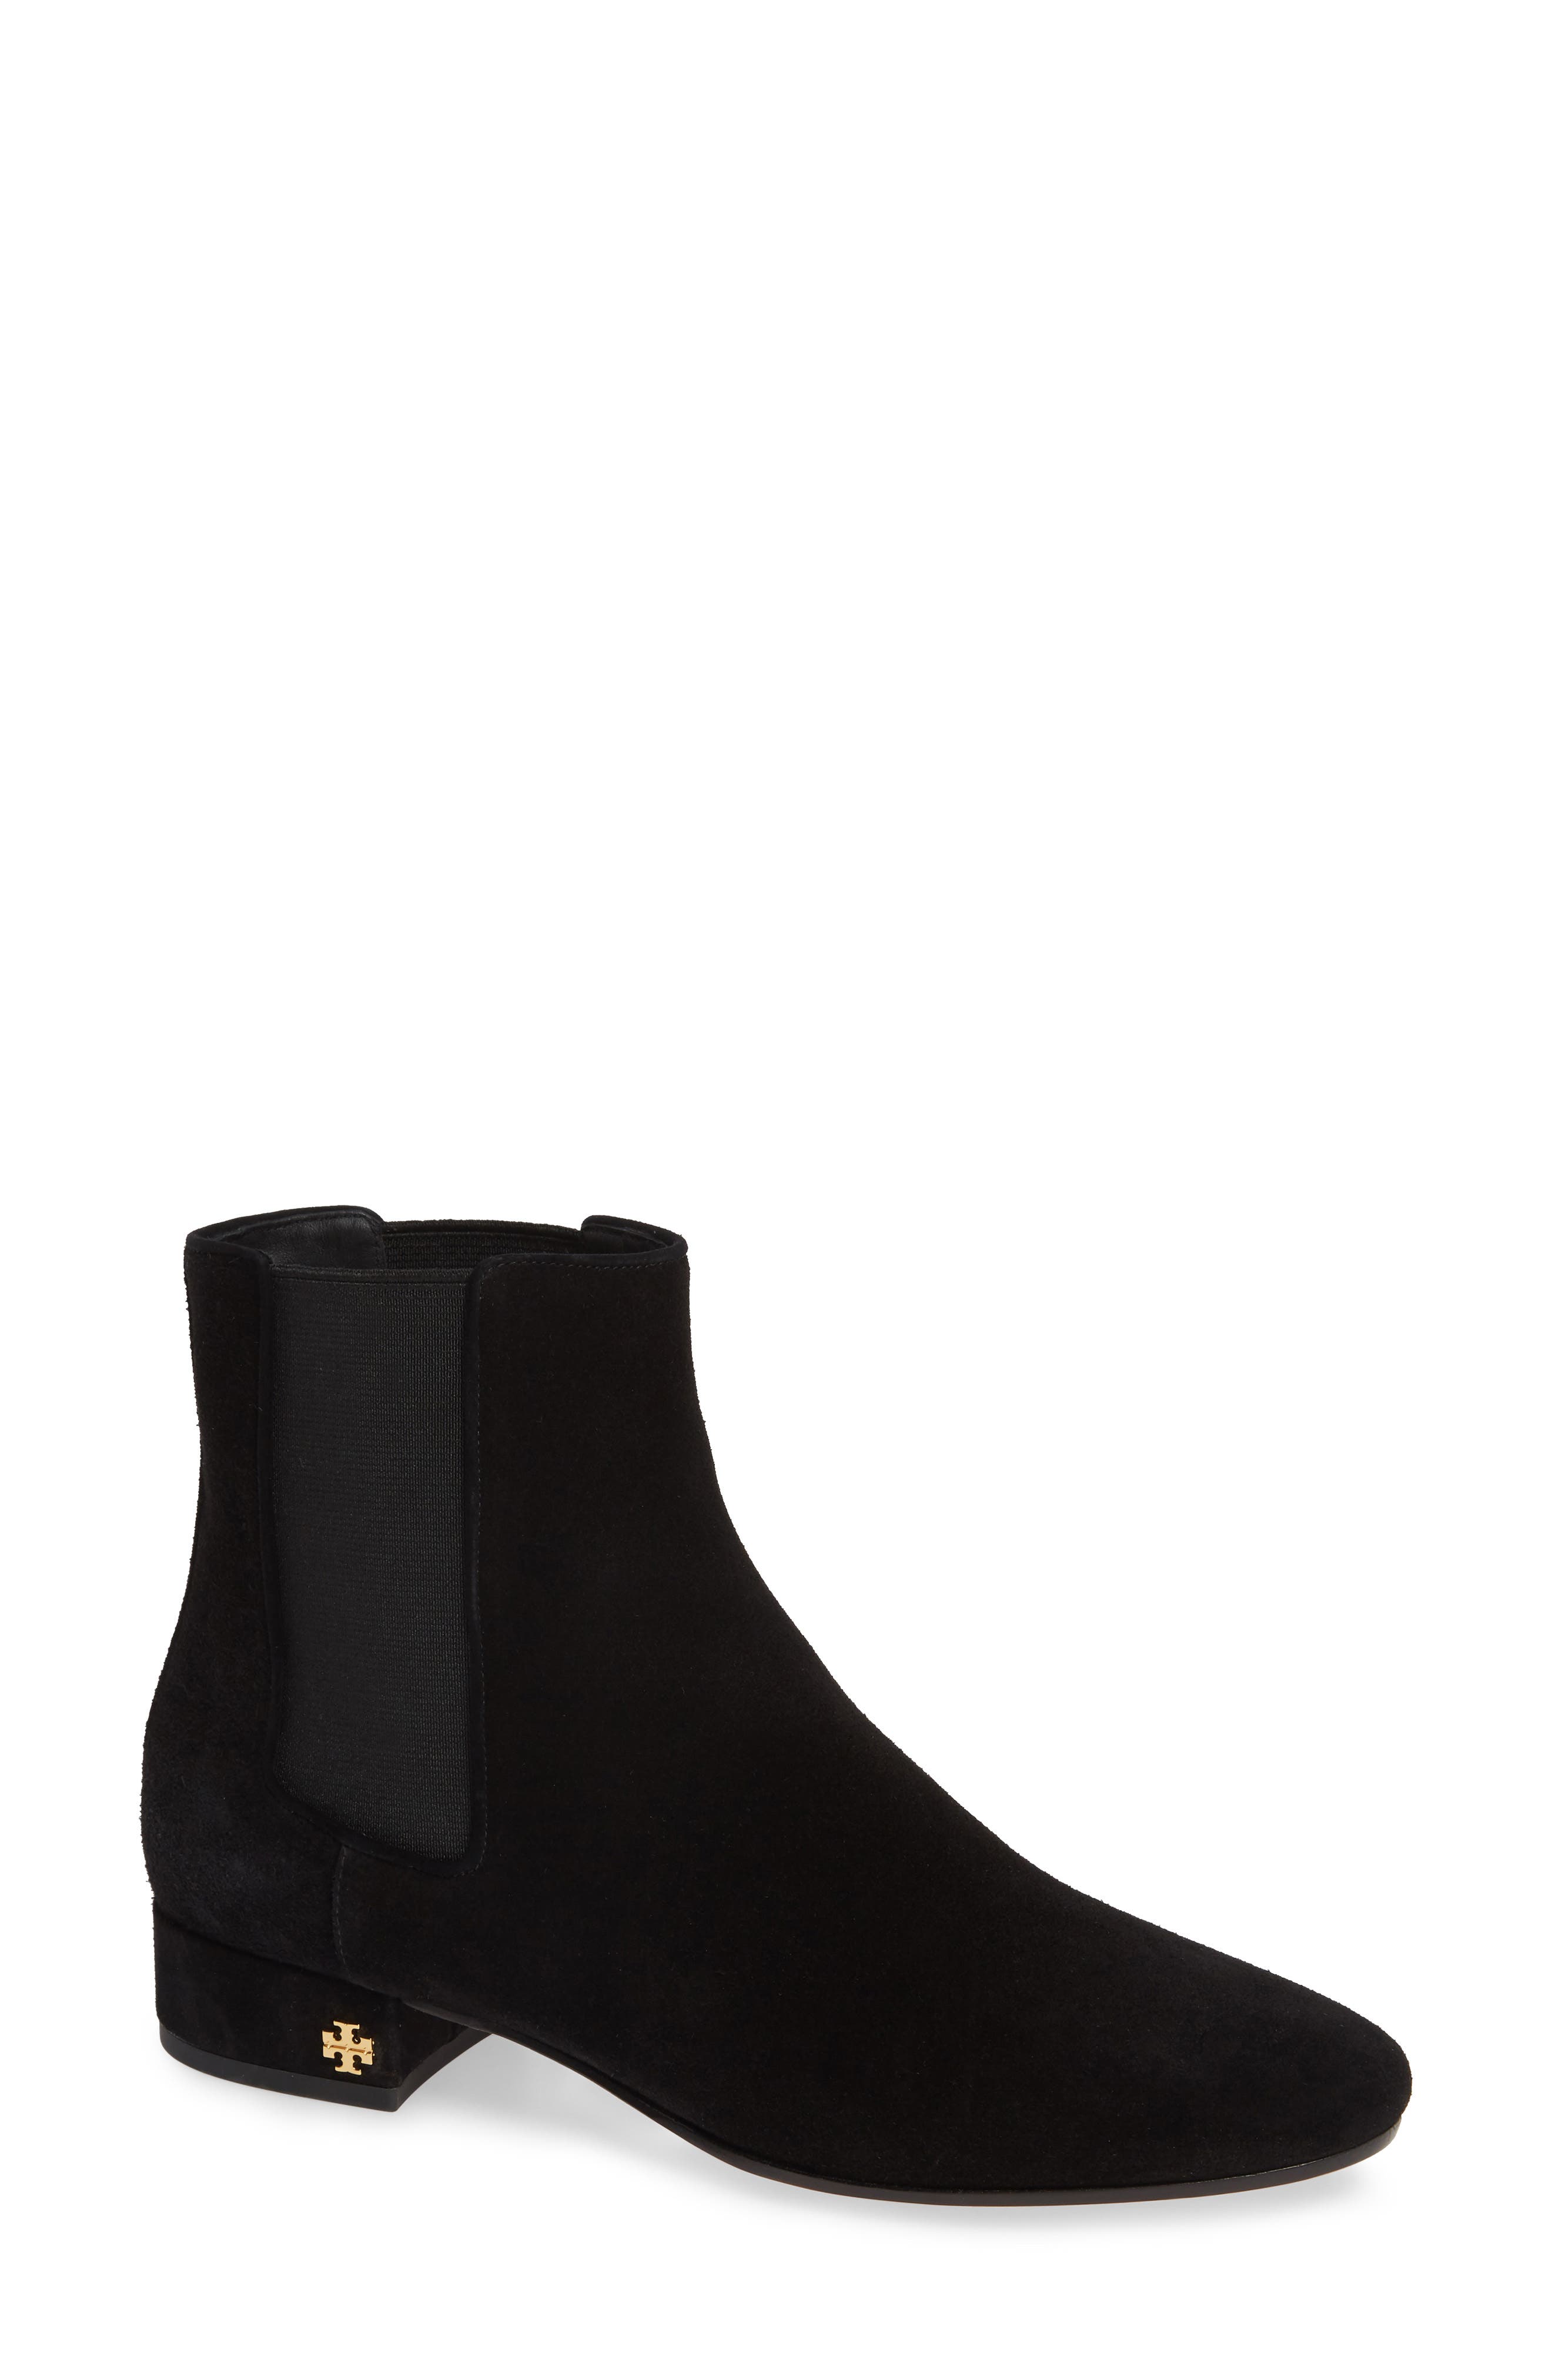 pascal chelsea boot tory burch